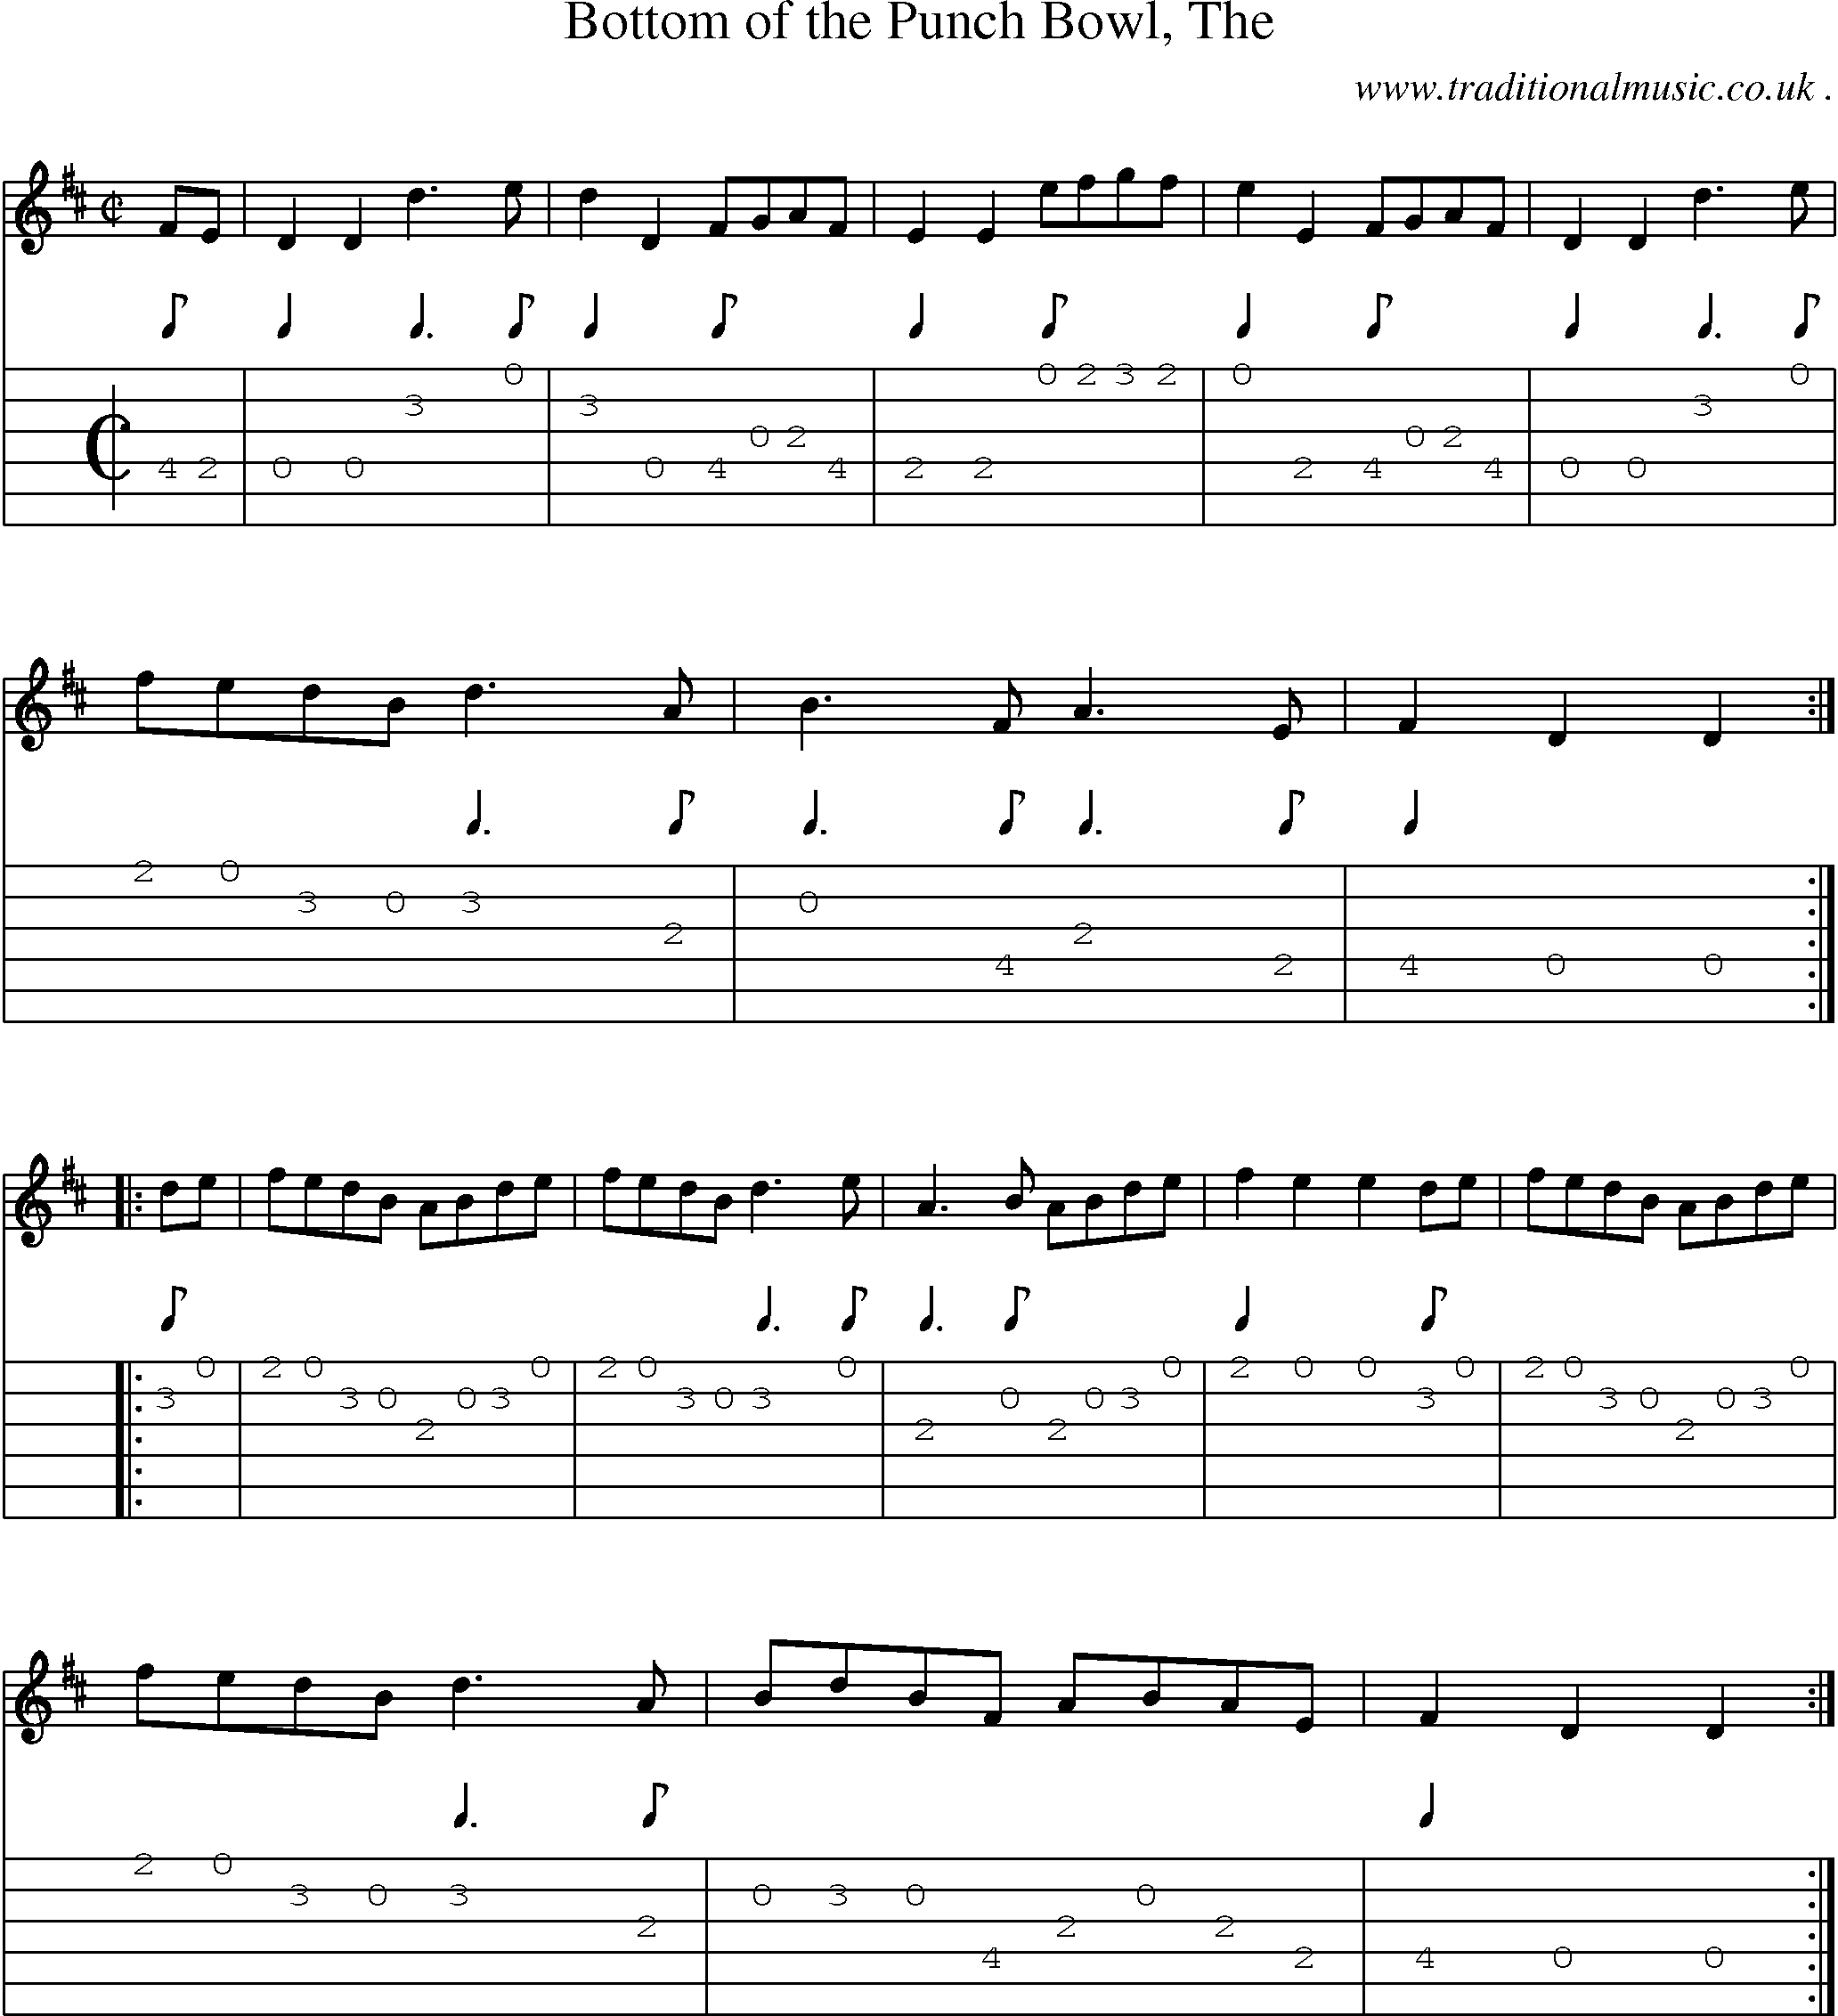 Sheet-music  score, Chords and Guitar Tabs for Bottom Of The Punch Bowl The